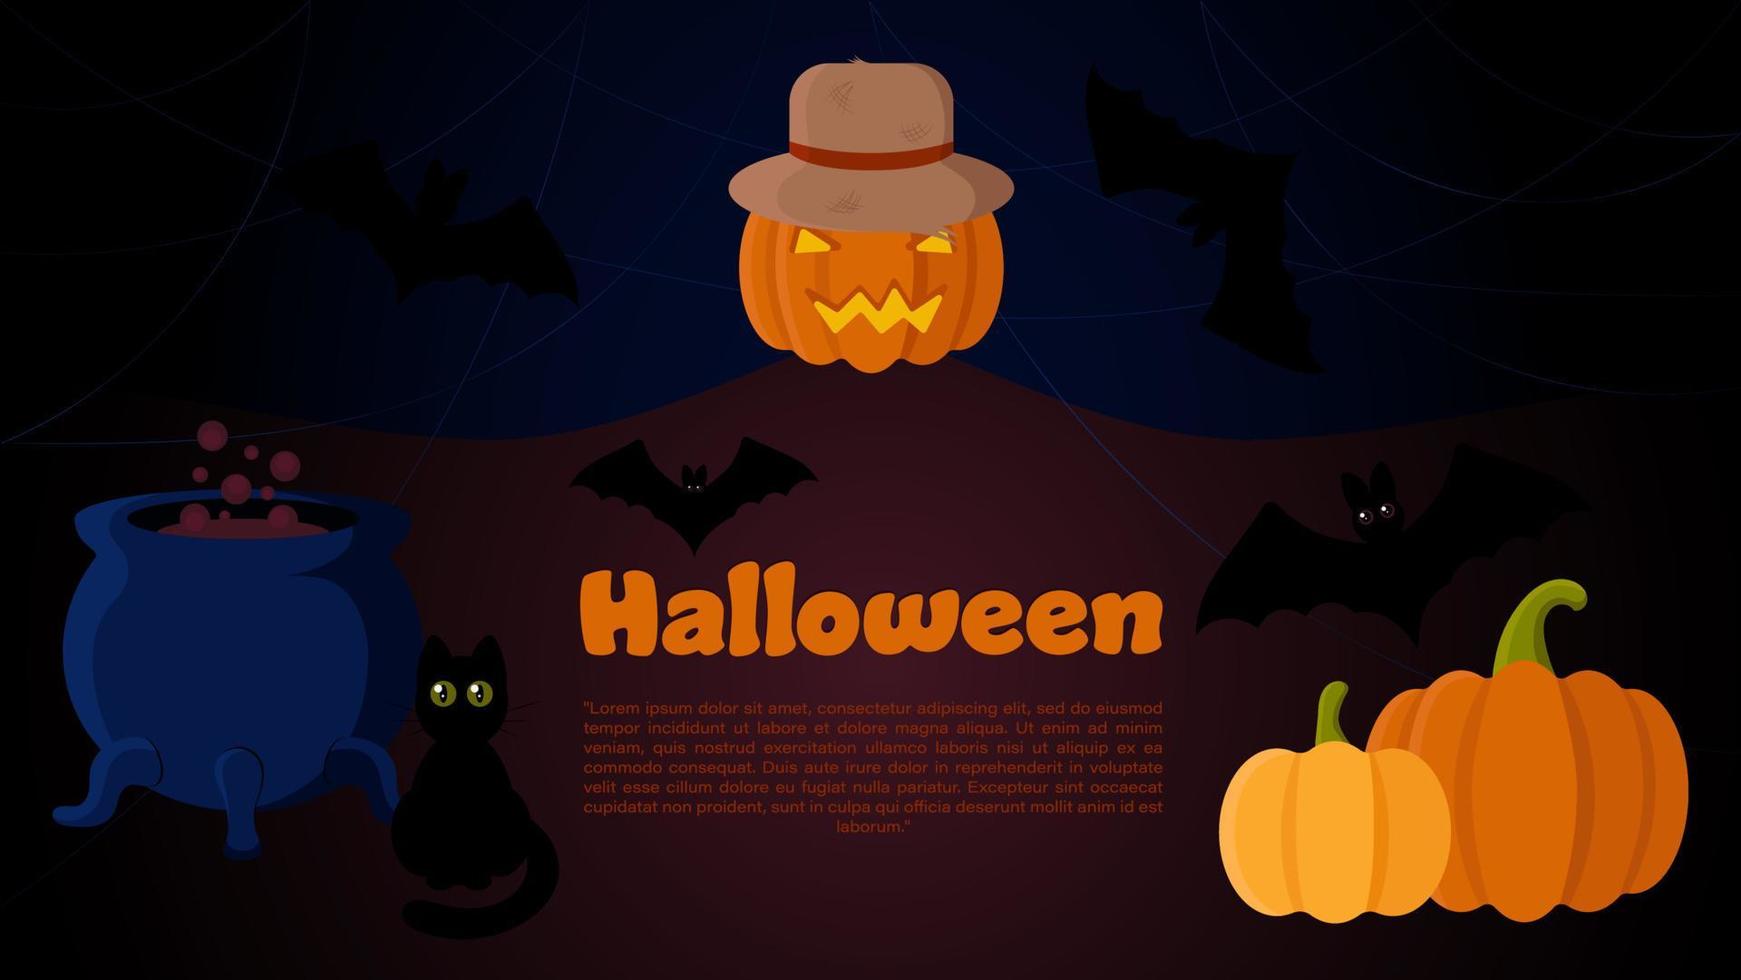 Halloween Vector Banner Template With Jack o'Lantern Scarecrow, Pumpkins, Witch's Cauldron, Cat and Bats Silhouettes. Perfect for Web Sites, Social Media, Printed Materials, etc.